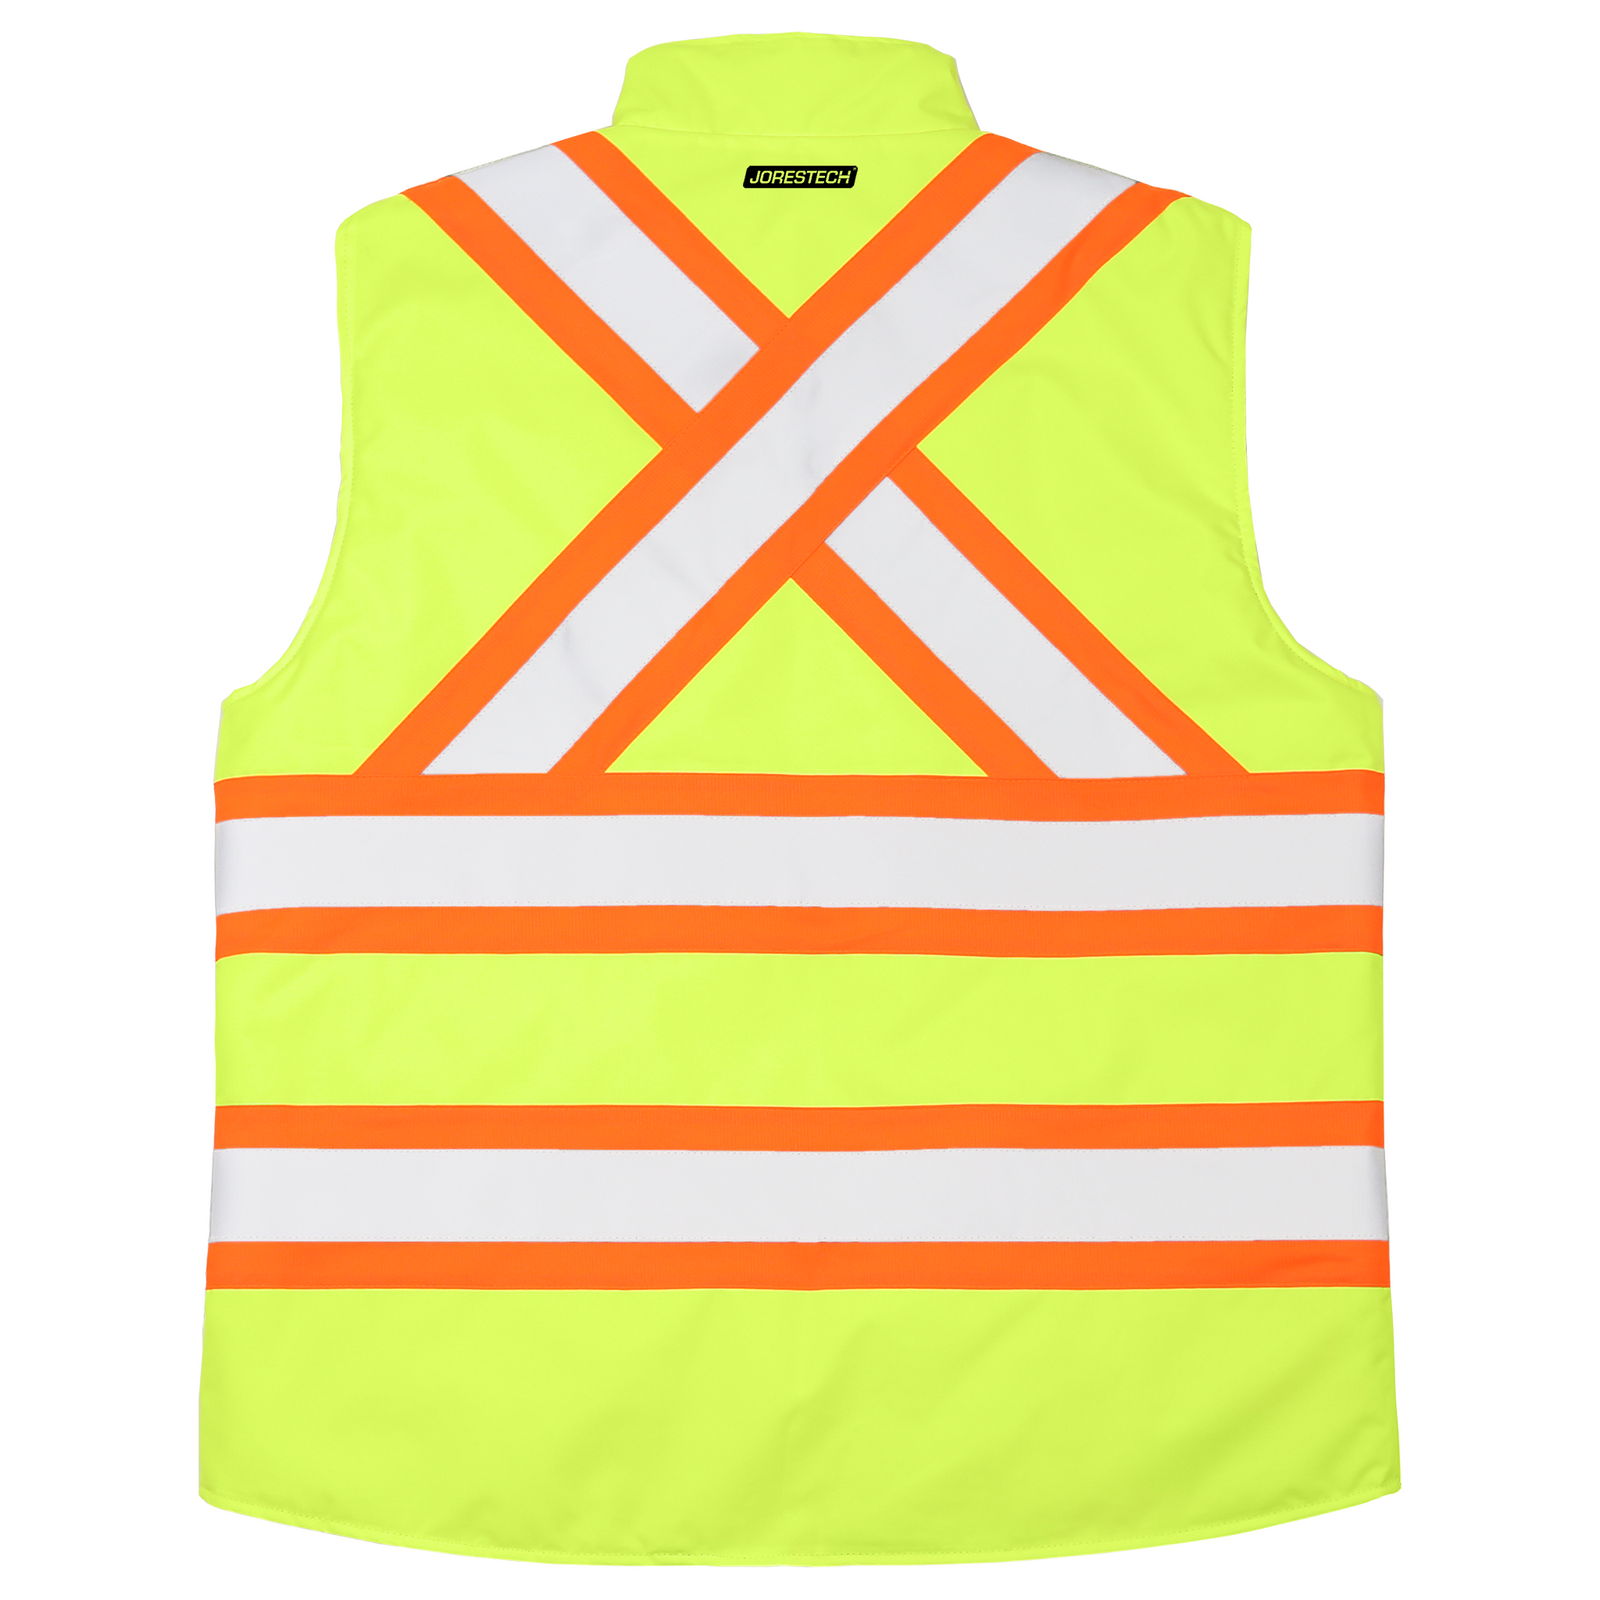 Back view of the yellow JORESTECH vi-vis X on back reversible insulated safety vest with reflective and orange contrasting strips